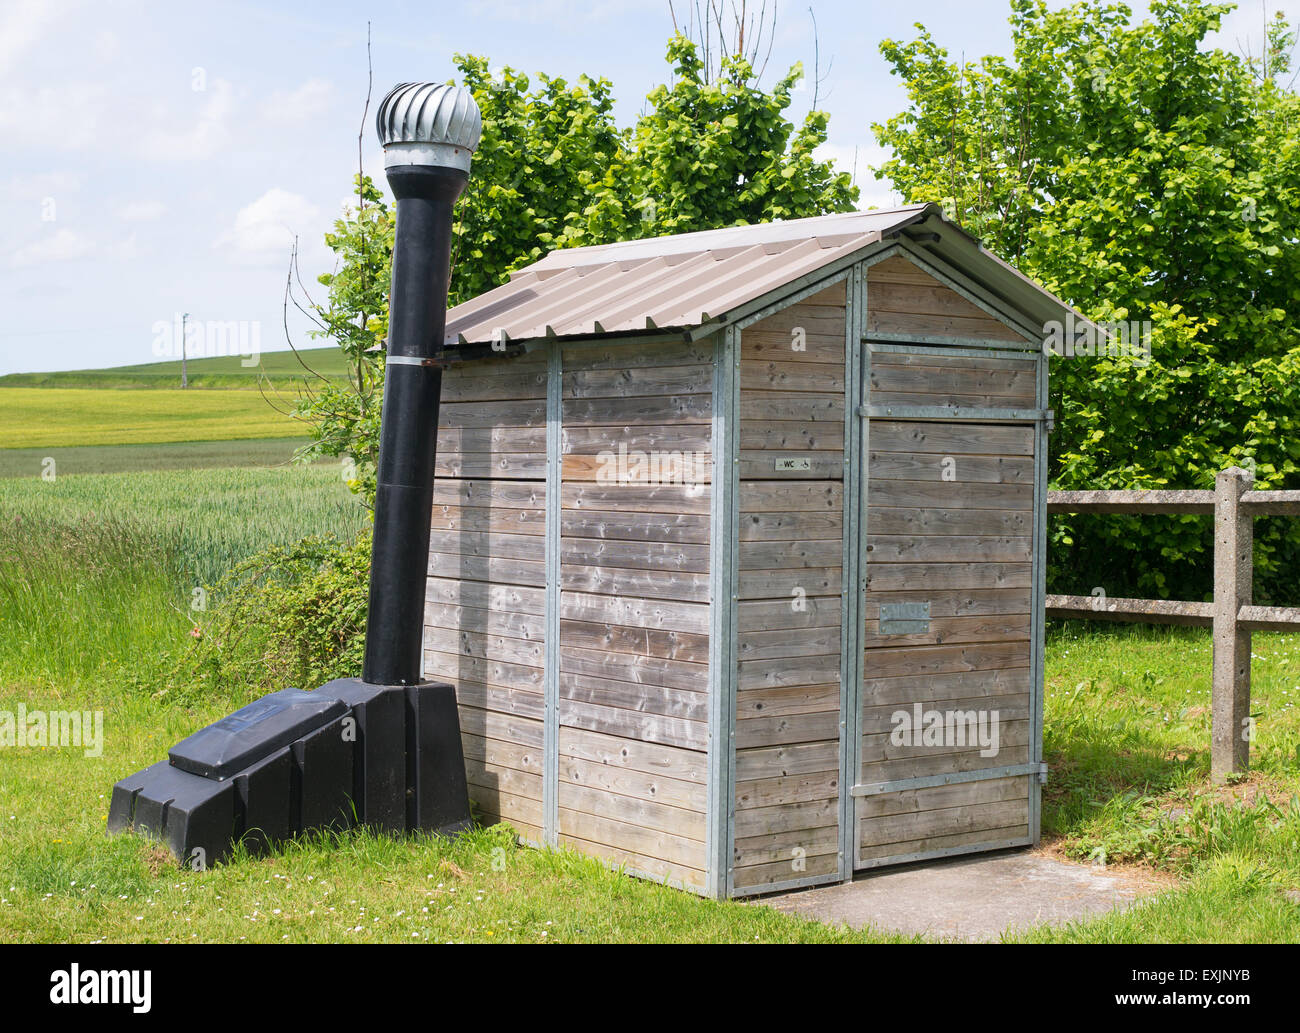 An Enviro Loo or environmentally friendly composting toilet seen on the Greenway or Avenue Verte near Dieppe, France, Europe Stock Photo